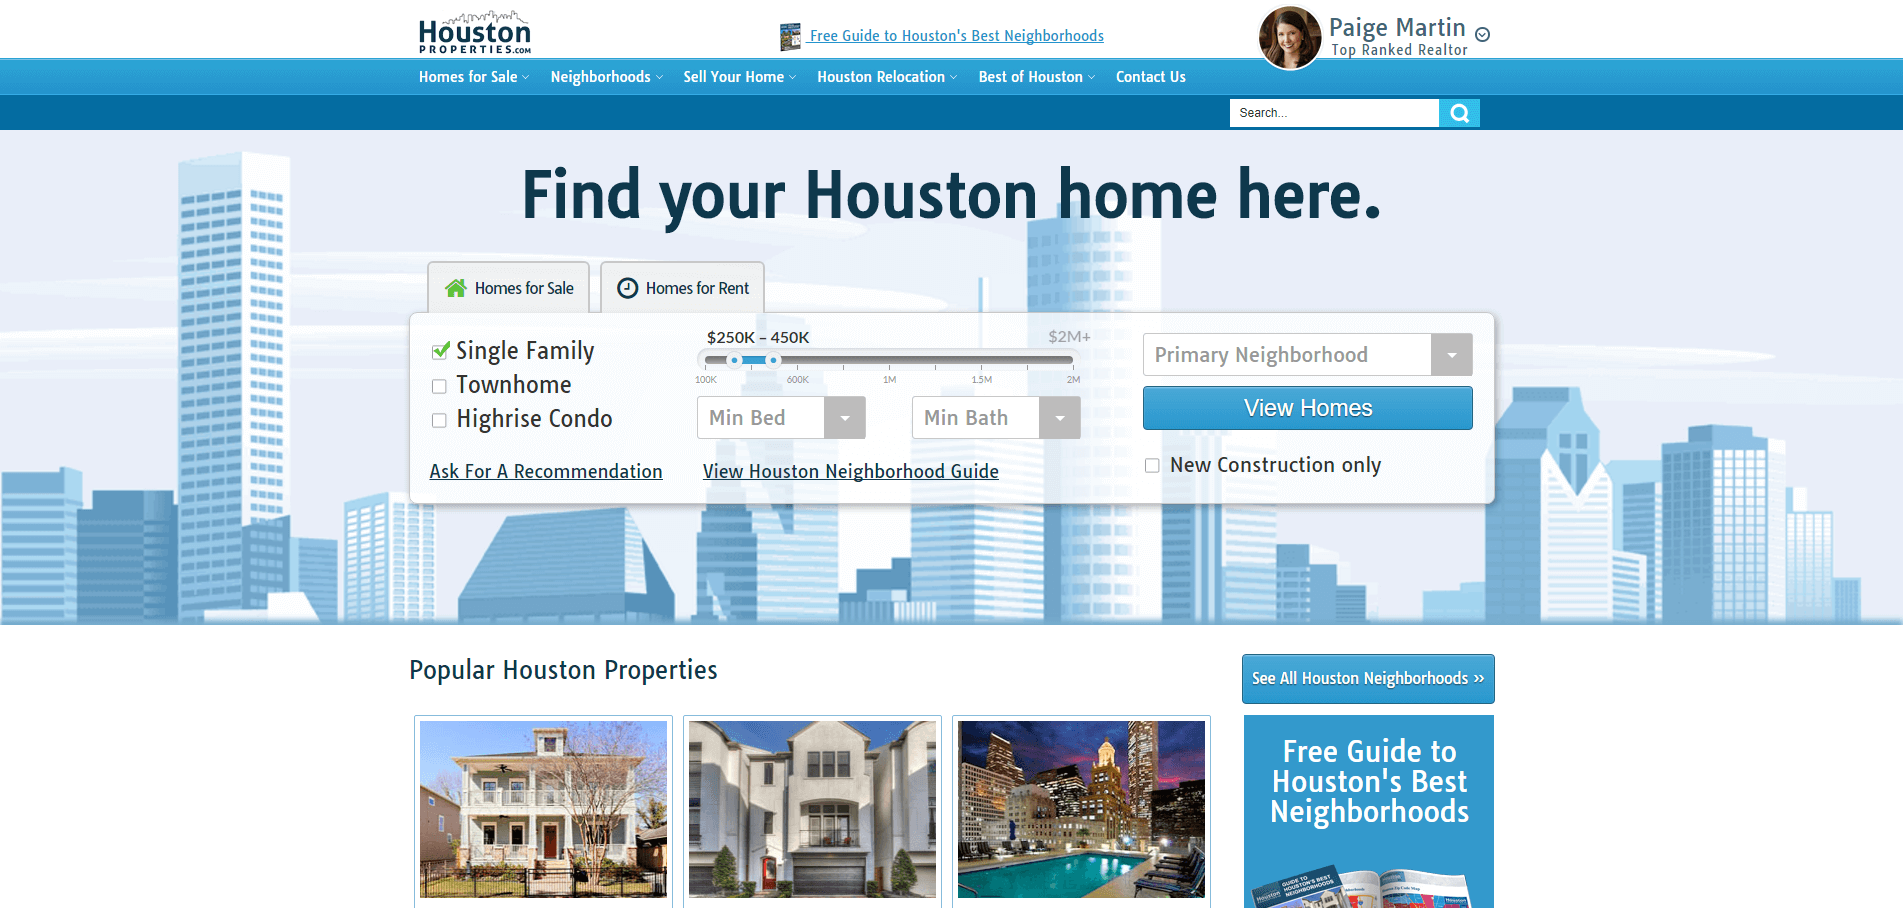  Whoa!  Here are 101 of the best real estate websites.  Each site is ranked 1-101 with a description and review.  Here's houstonproperties.com.  Want to see who made the cut? 